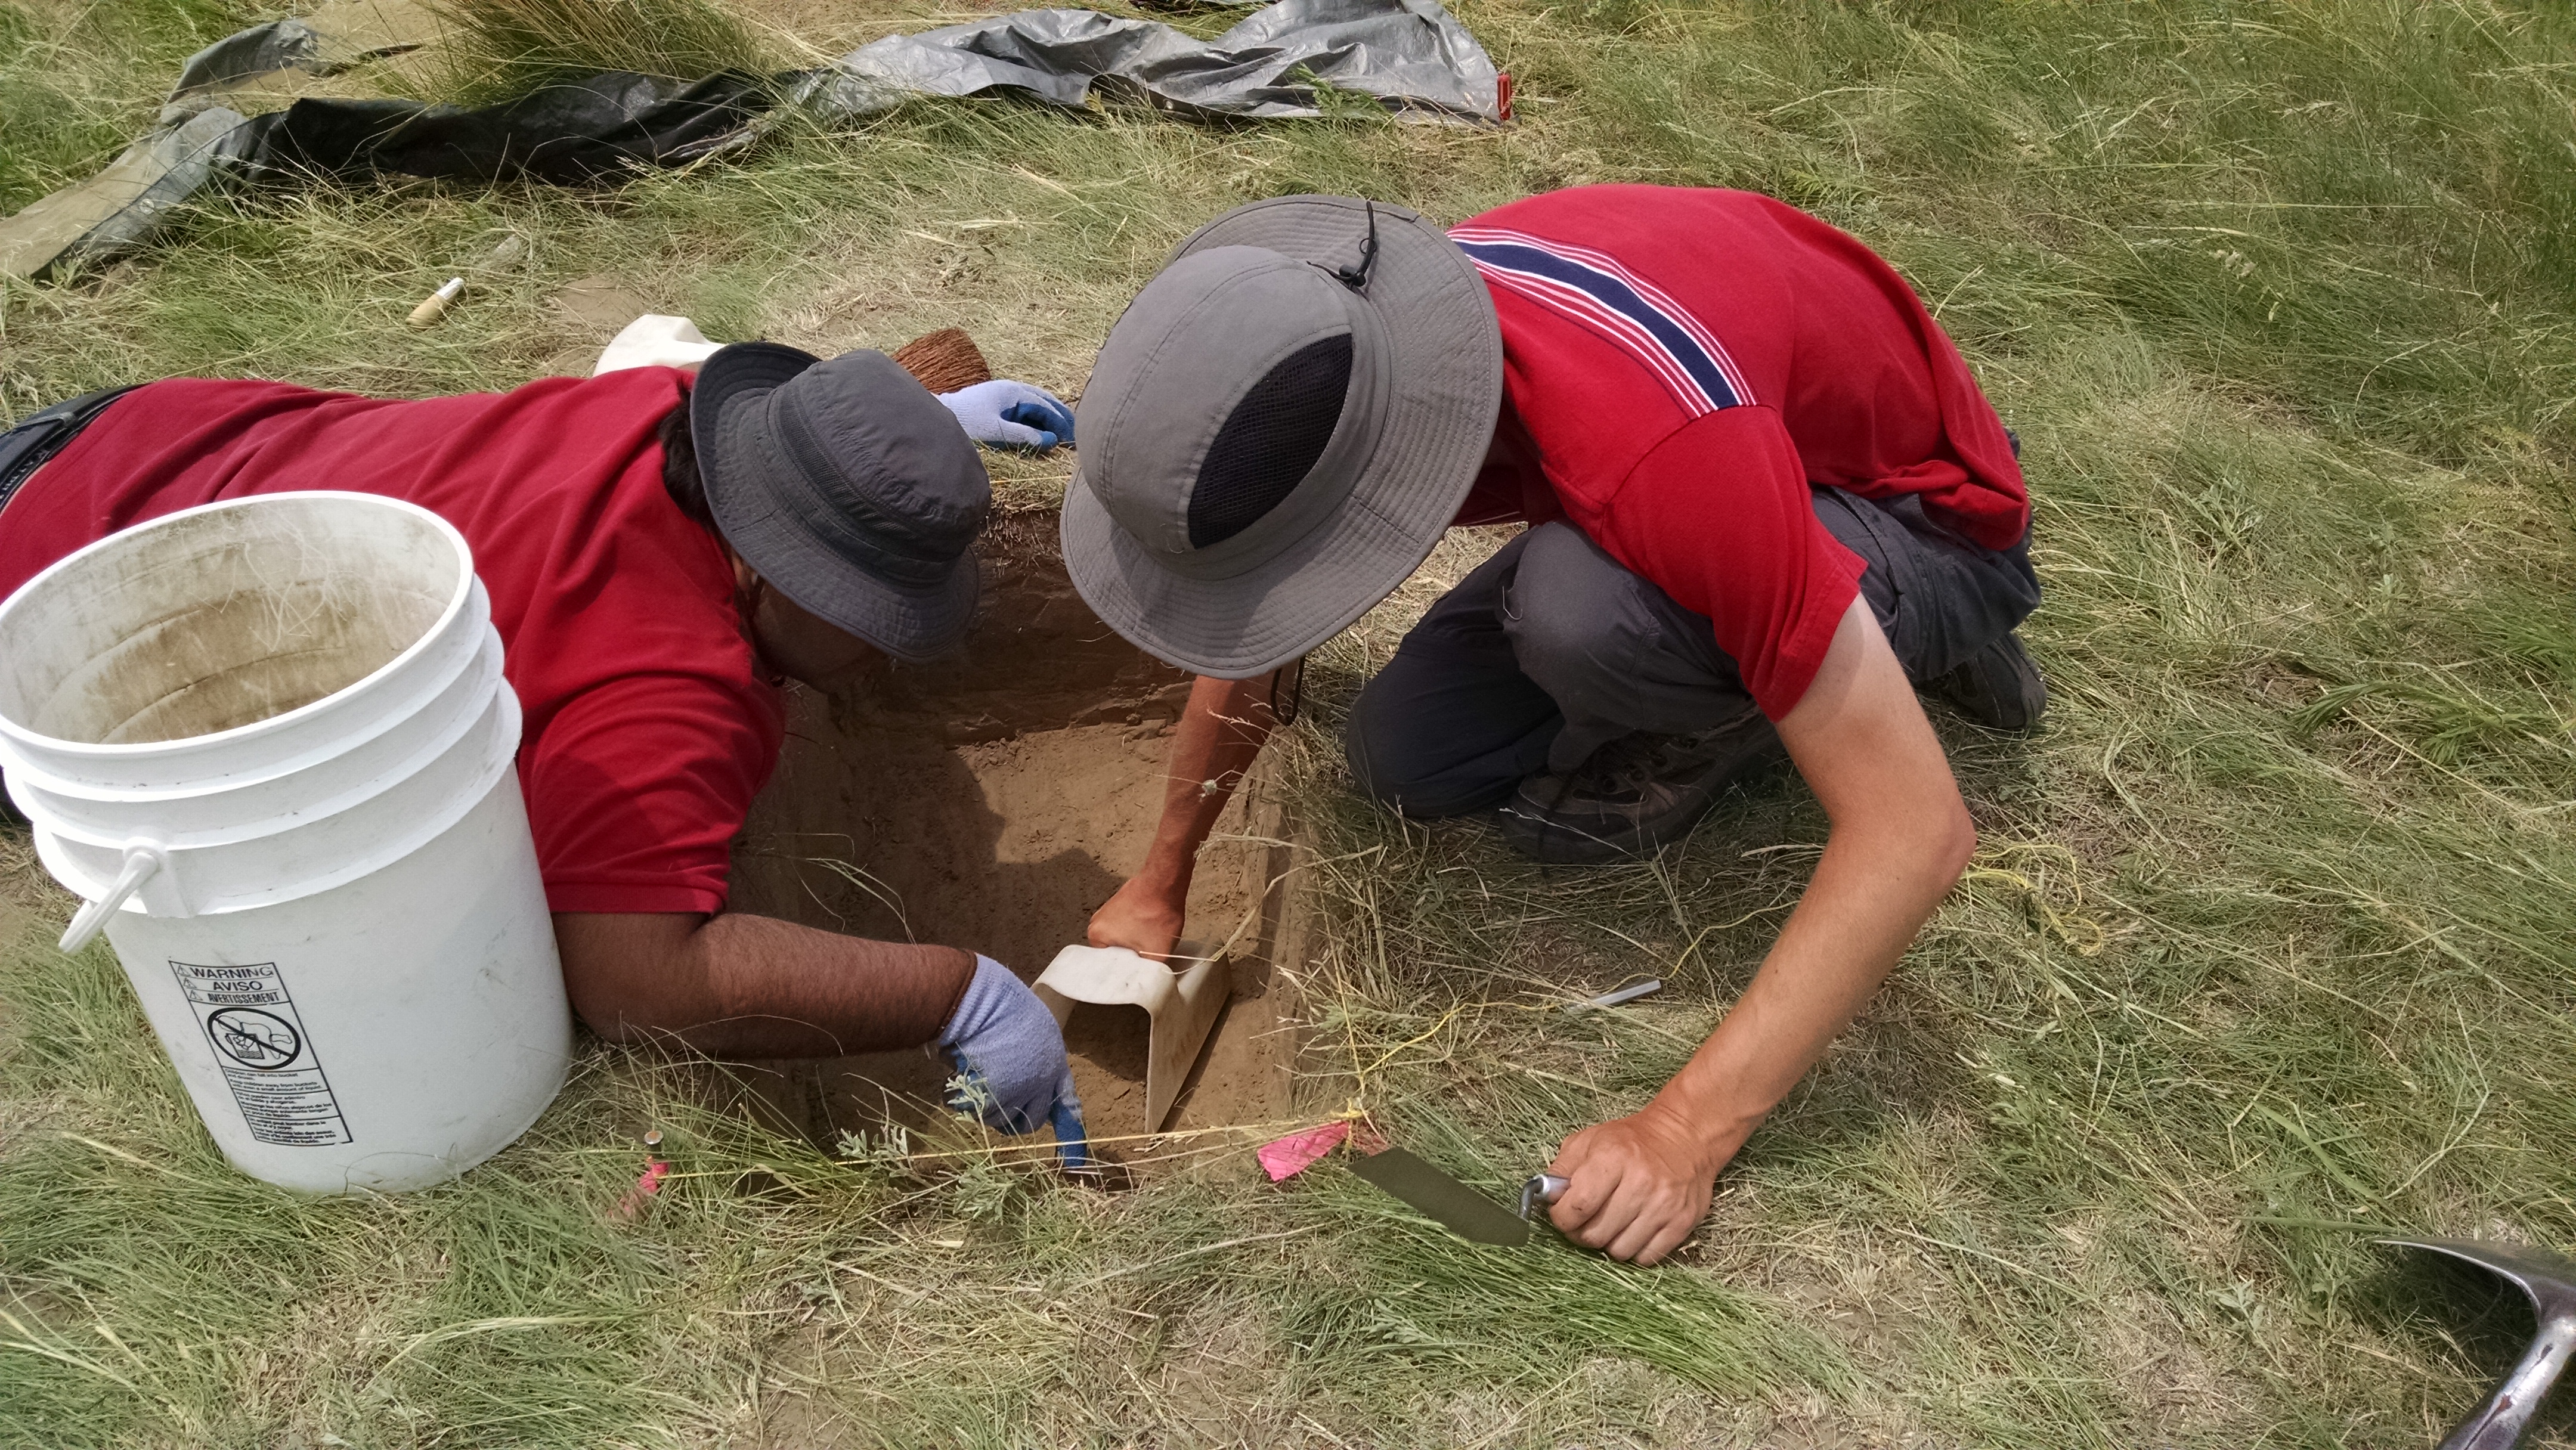 Students recognize, document, and map at archaeology field school